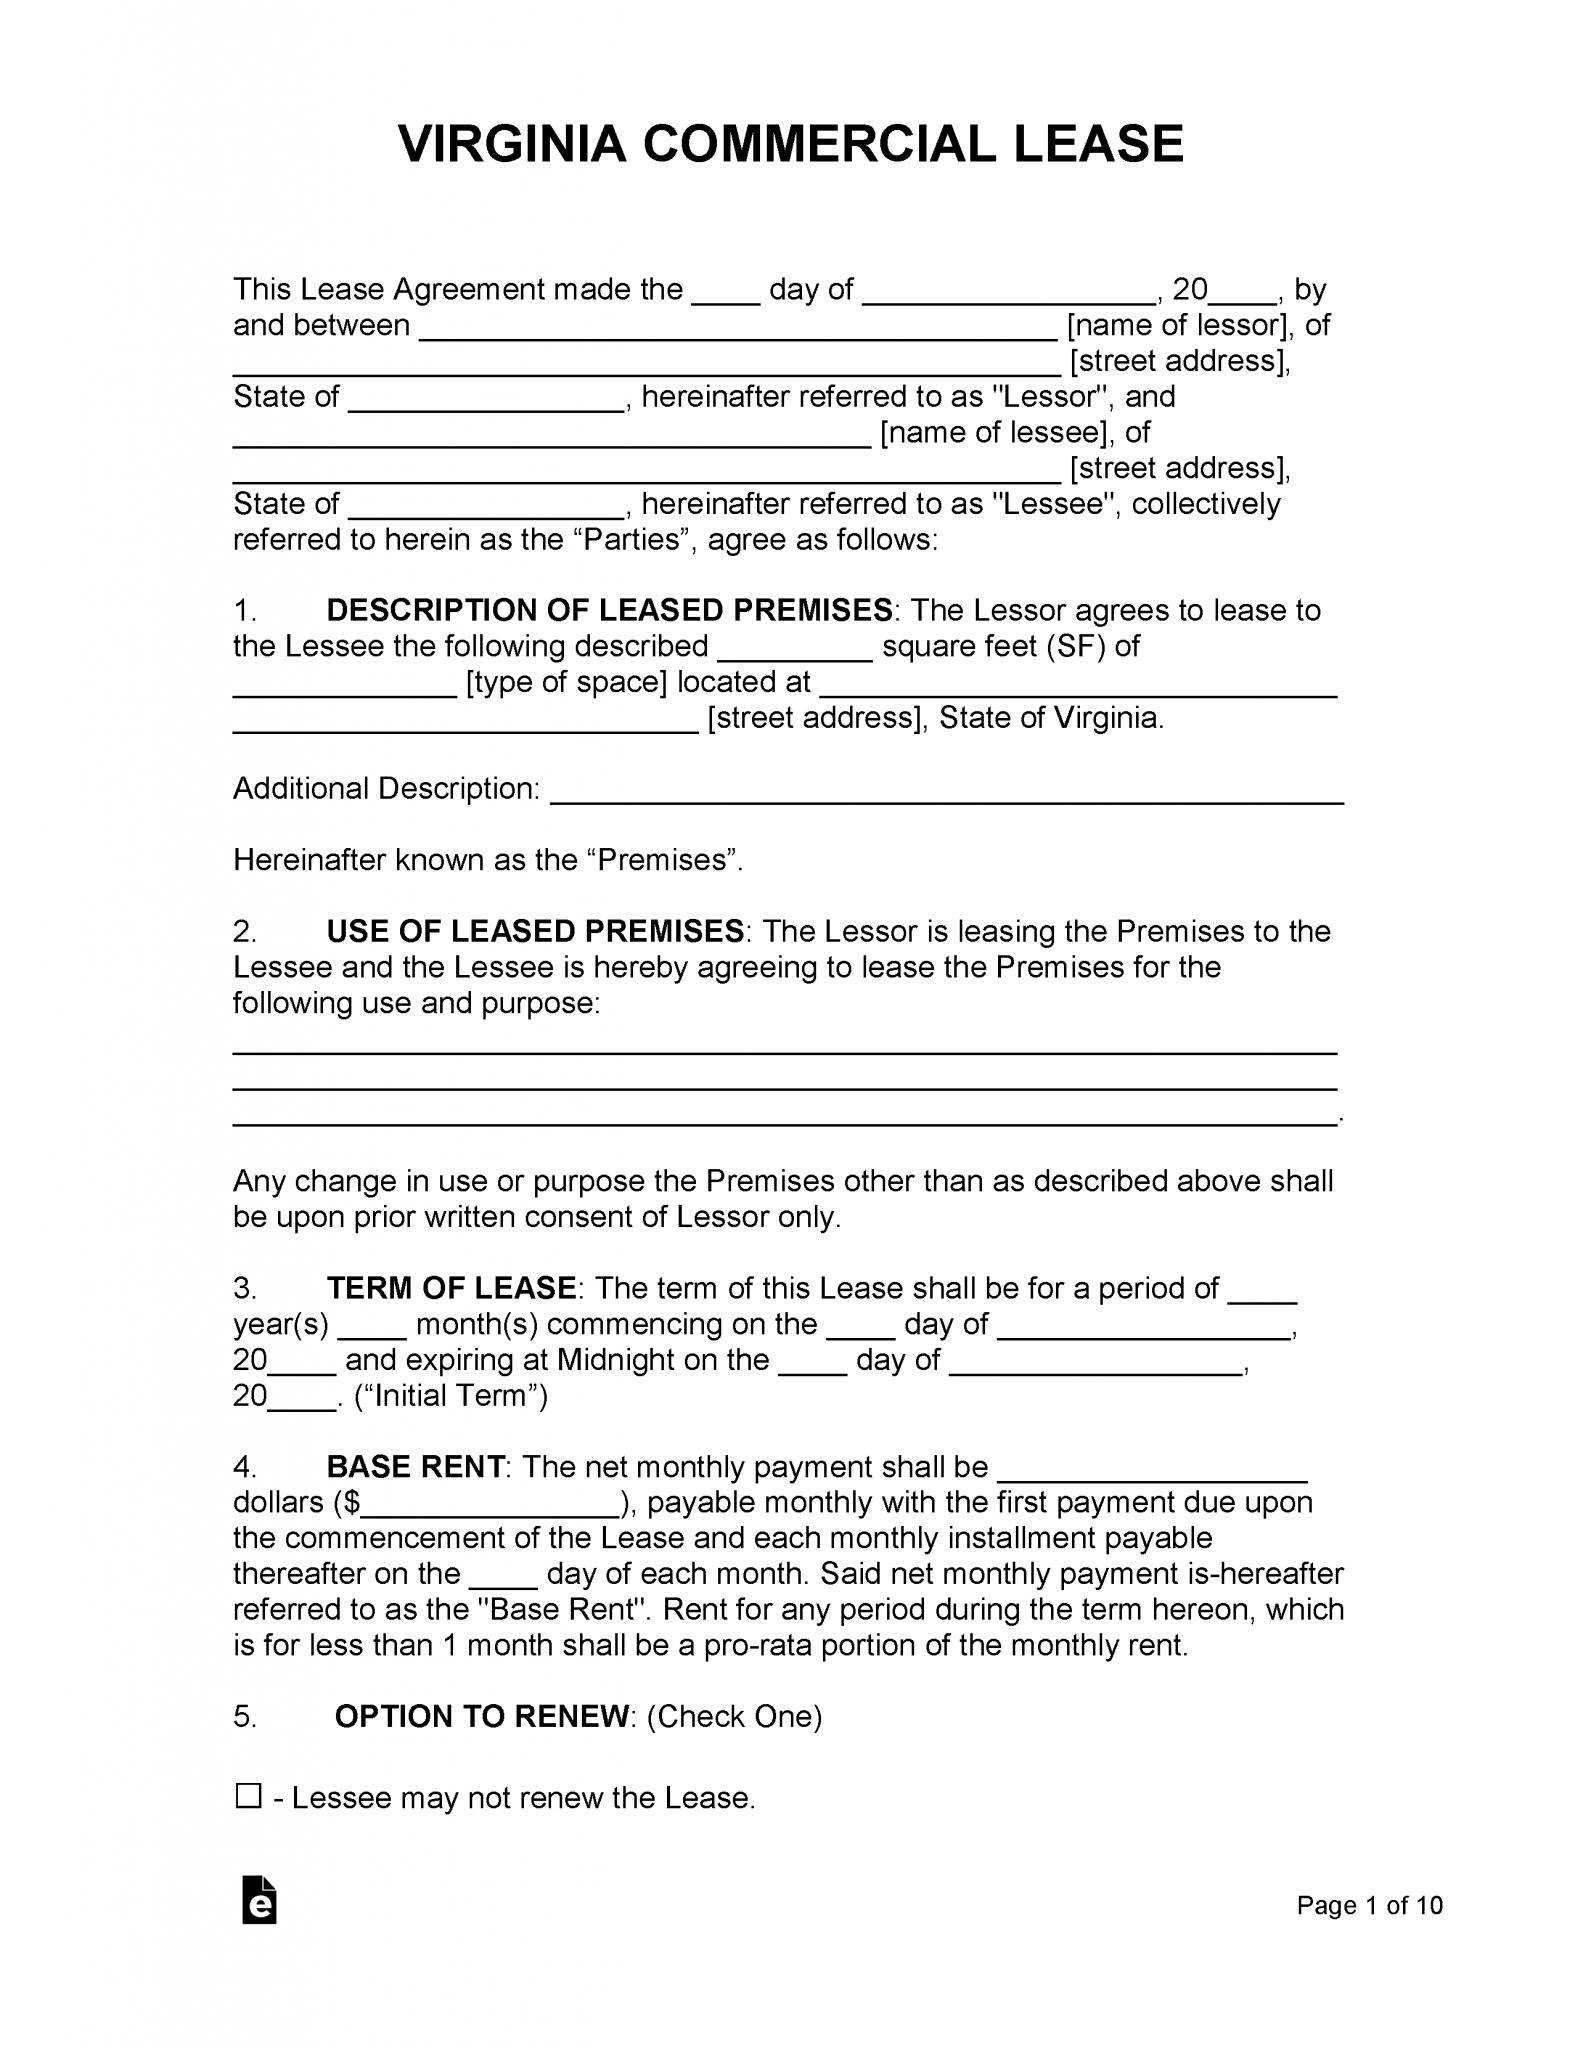 free-virginia-standard-residential-lease-agreement-template-pdf